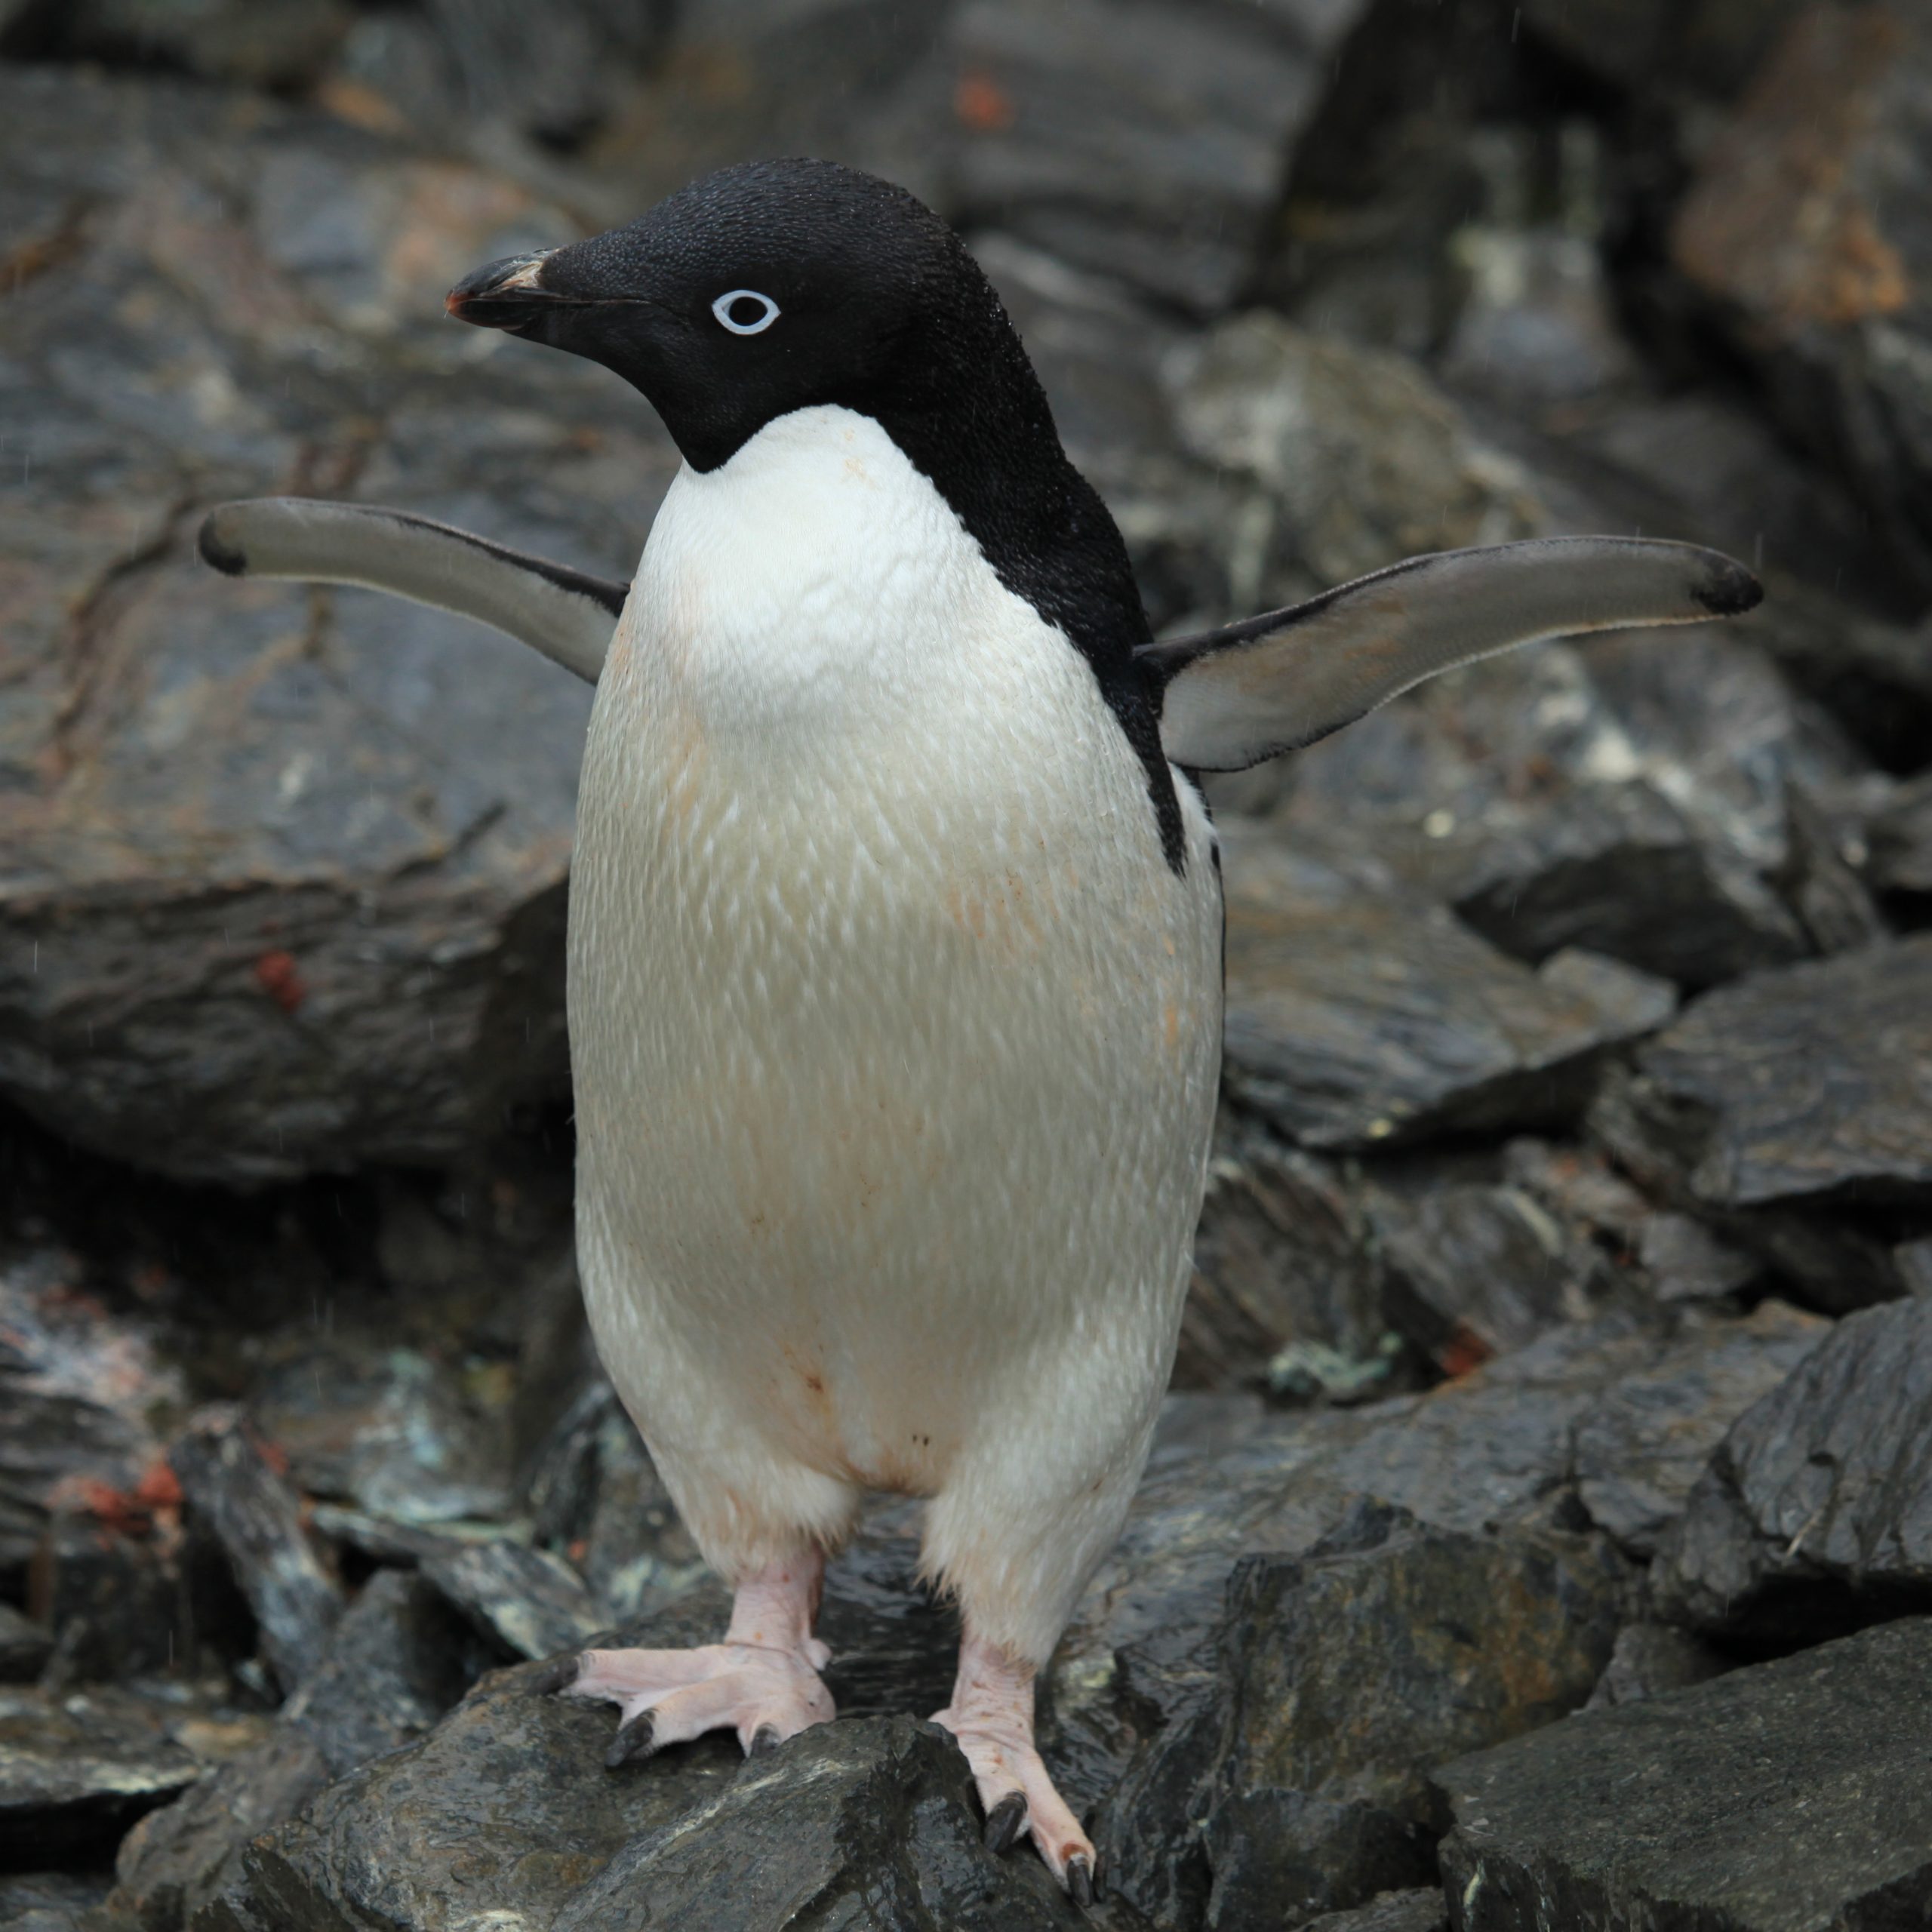 Belligerent Birds: Do penguins perform unprompted acts of aggression?